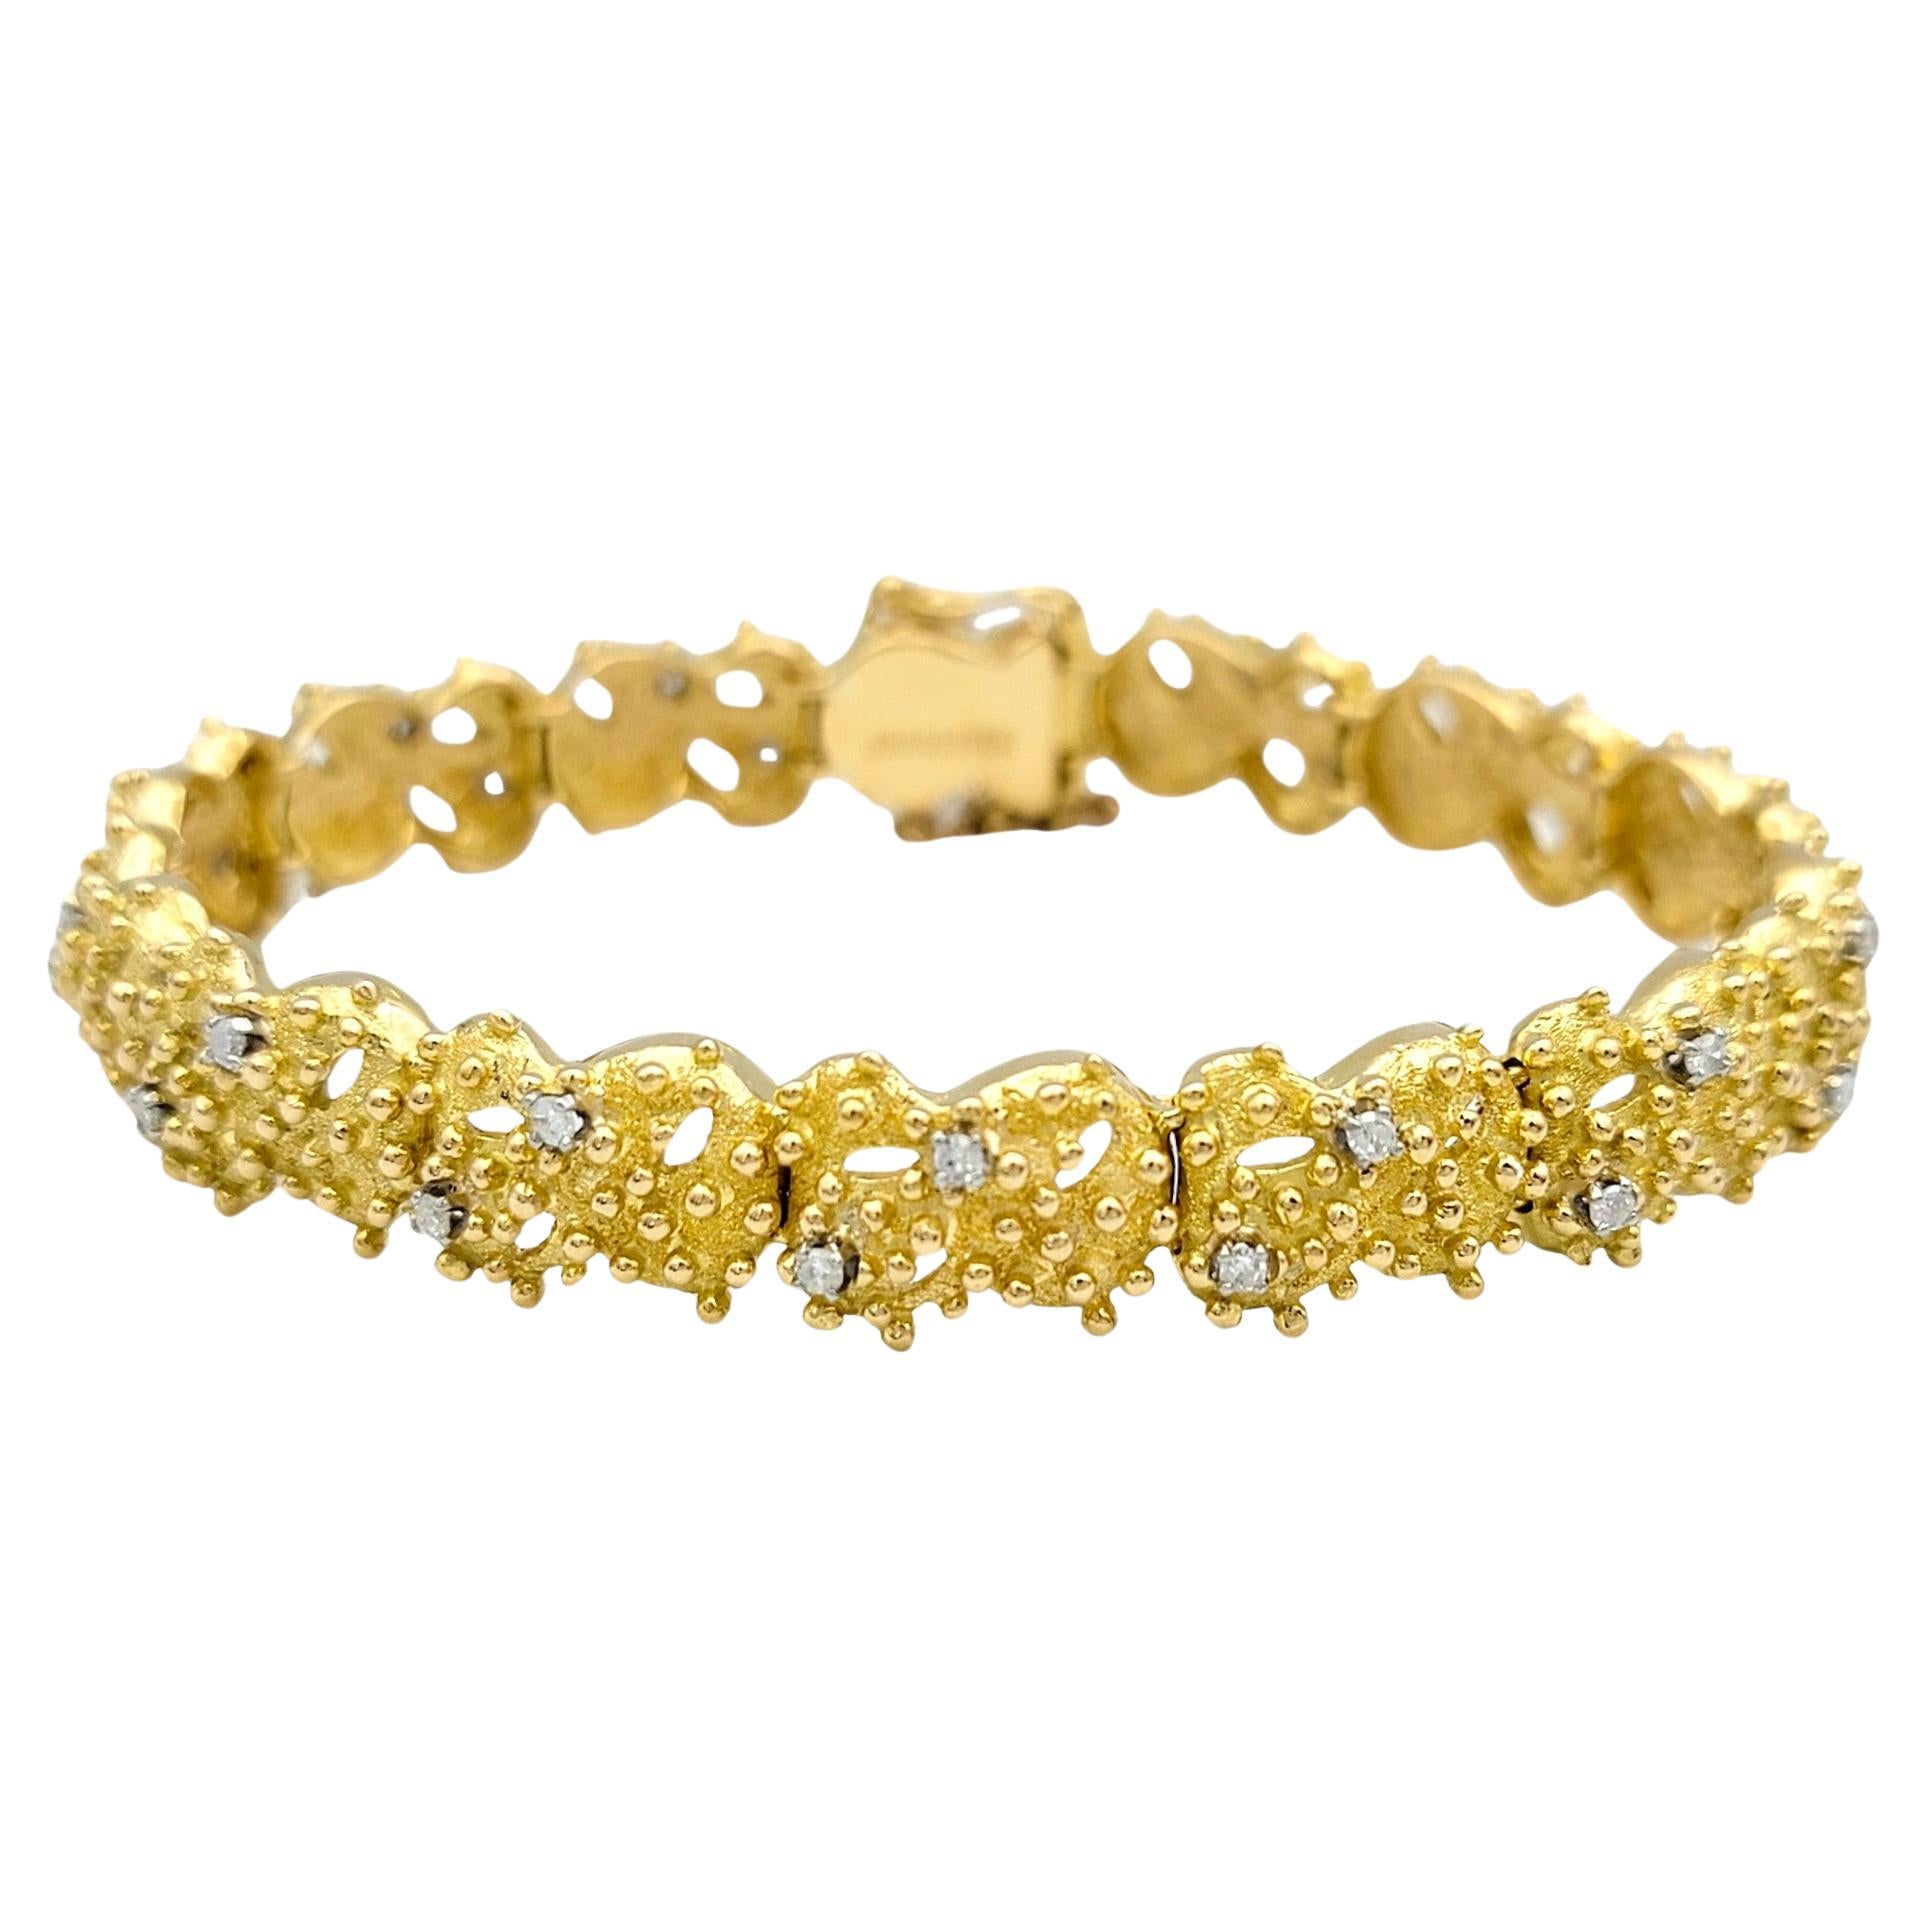 This beautiful J Rossi bracelet is a stunning work of art, blending the richness of 18 karat yellow gold with the timeless beauty of diamonds. Each link of the bracelet is meticulously crafted with an intricate granulated detailing. The tactile